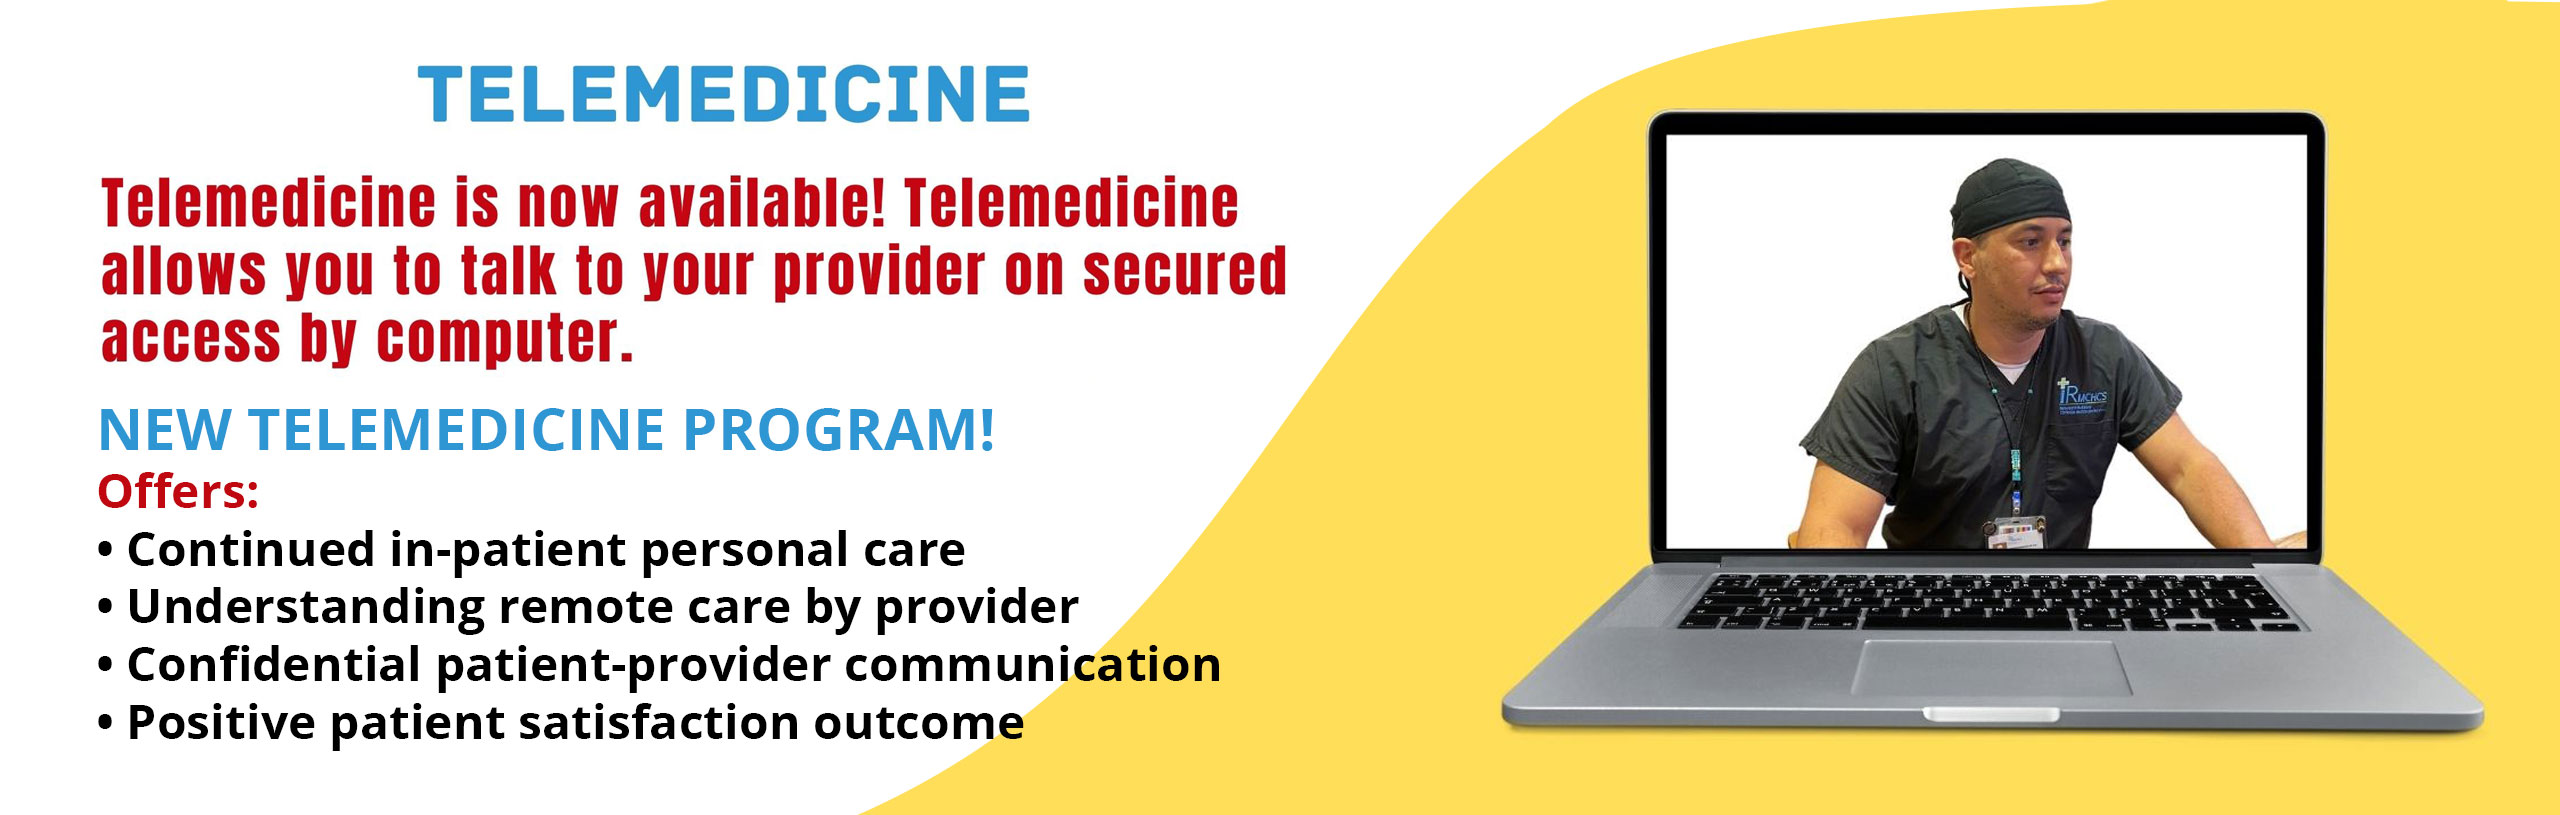 TELEMEDICINE
Telemedicine is now available! Telemedicine allows you to talk to your provider on secured access by computer.
NEW TELEMEDICINE PRGRAM!
Offers:
-Continued in-patient personal care
-Understanding remote care by provider
-Confidential patient-provider communication
-Positive patients satisfaction outcome